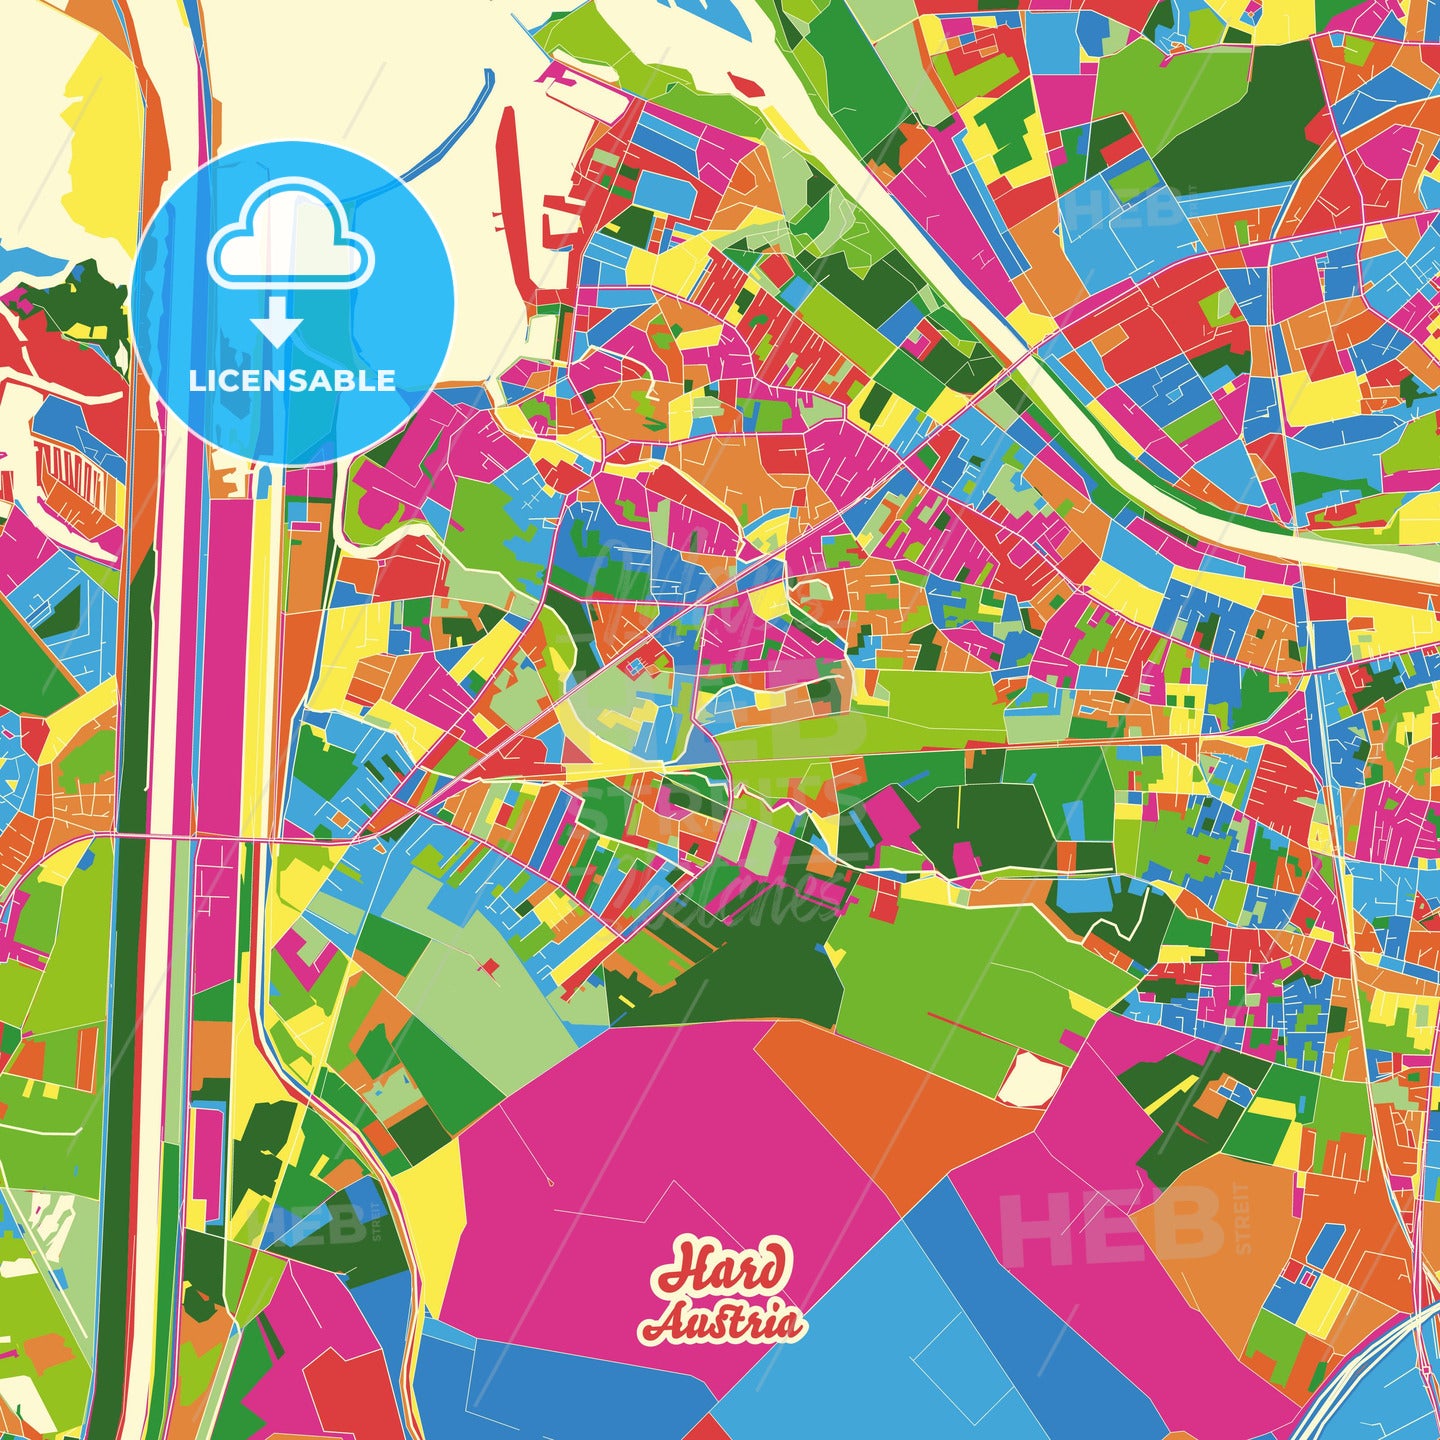 Hard, Austria Crazy Colorful Street Map Poster Template - HEBSTREITS Sketches